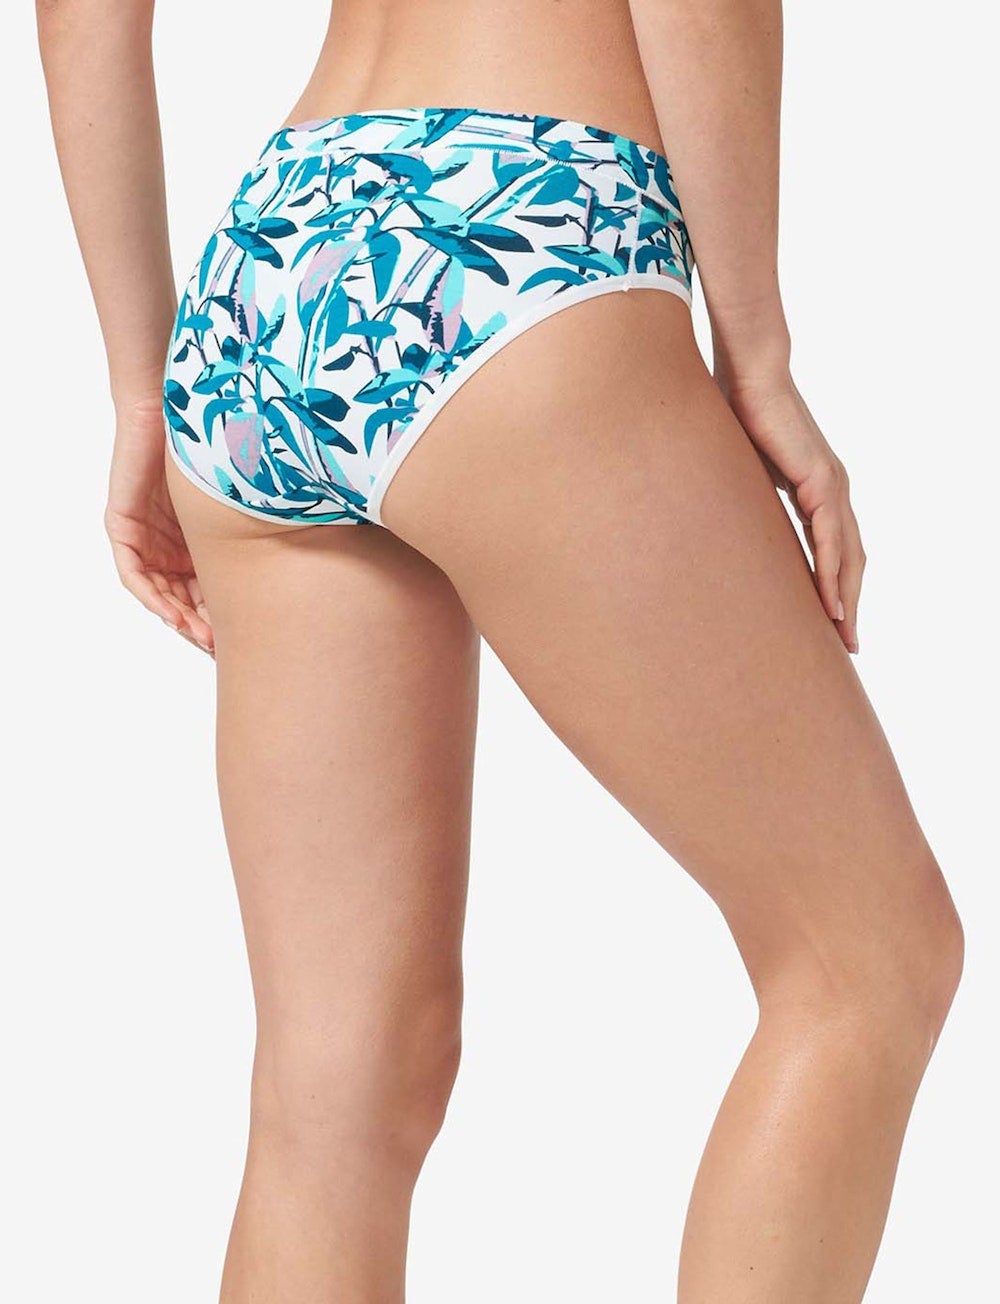 Cute cotton underwear that'll keep you lady bits cool for summer